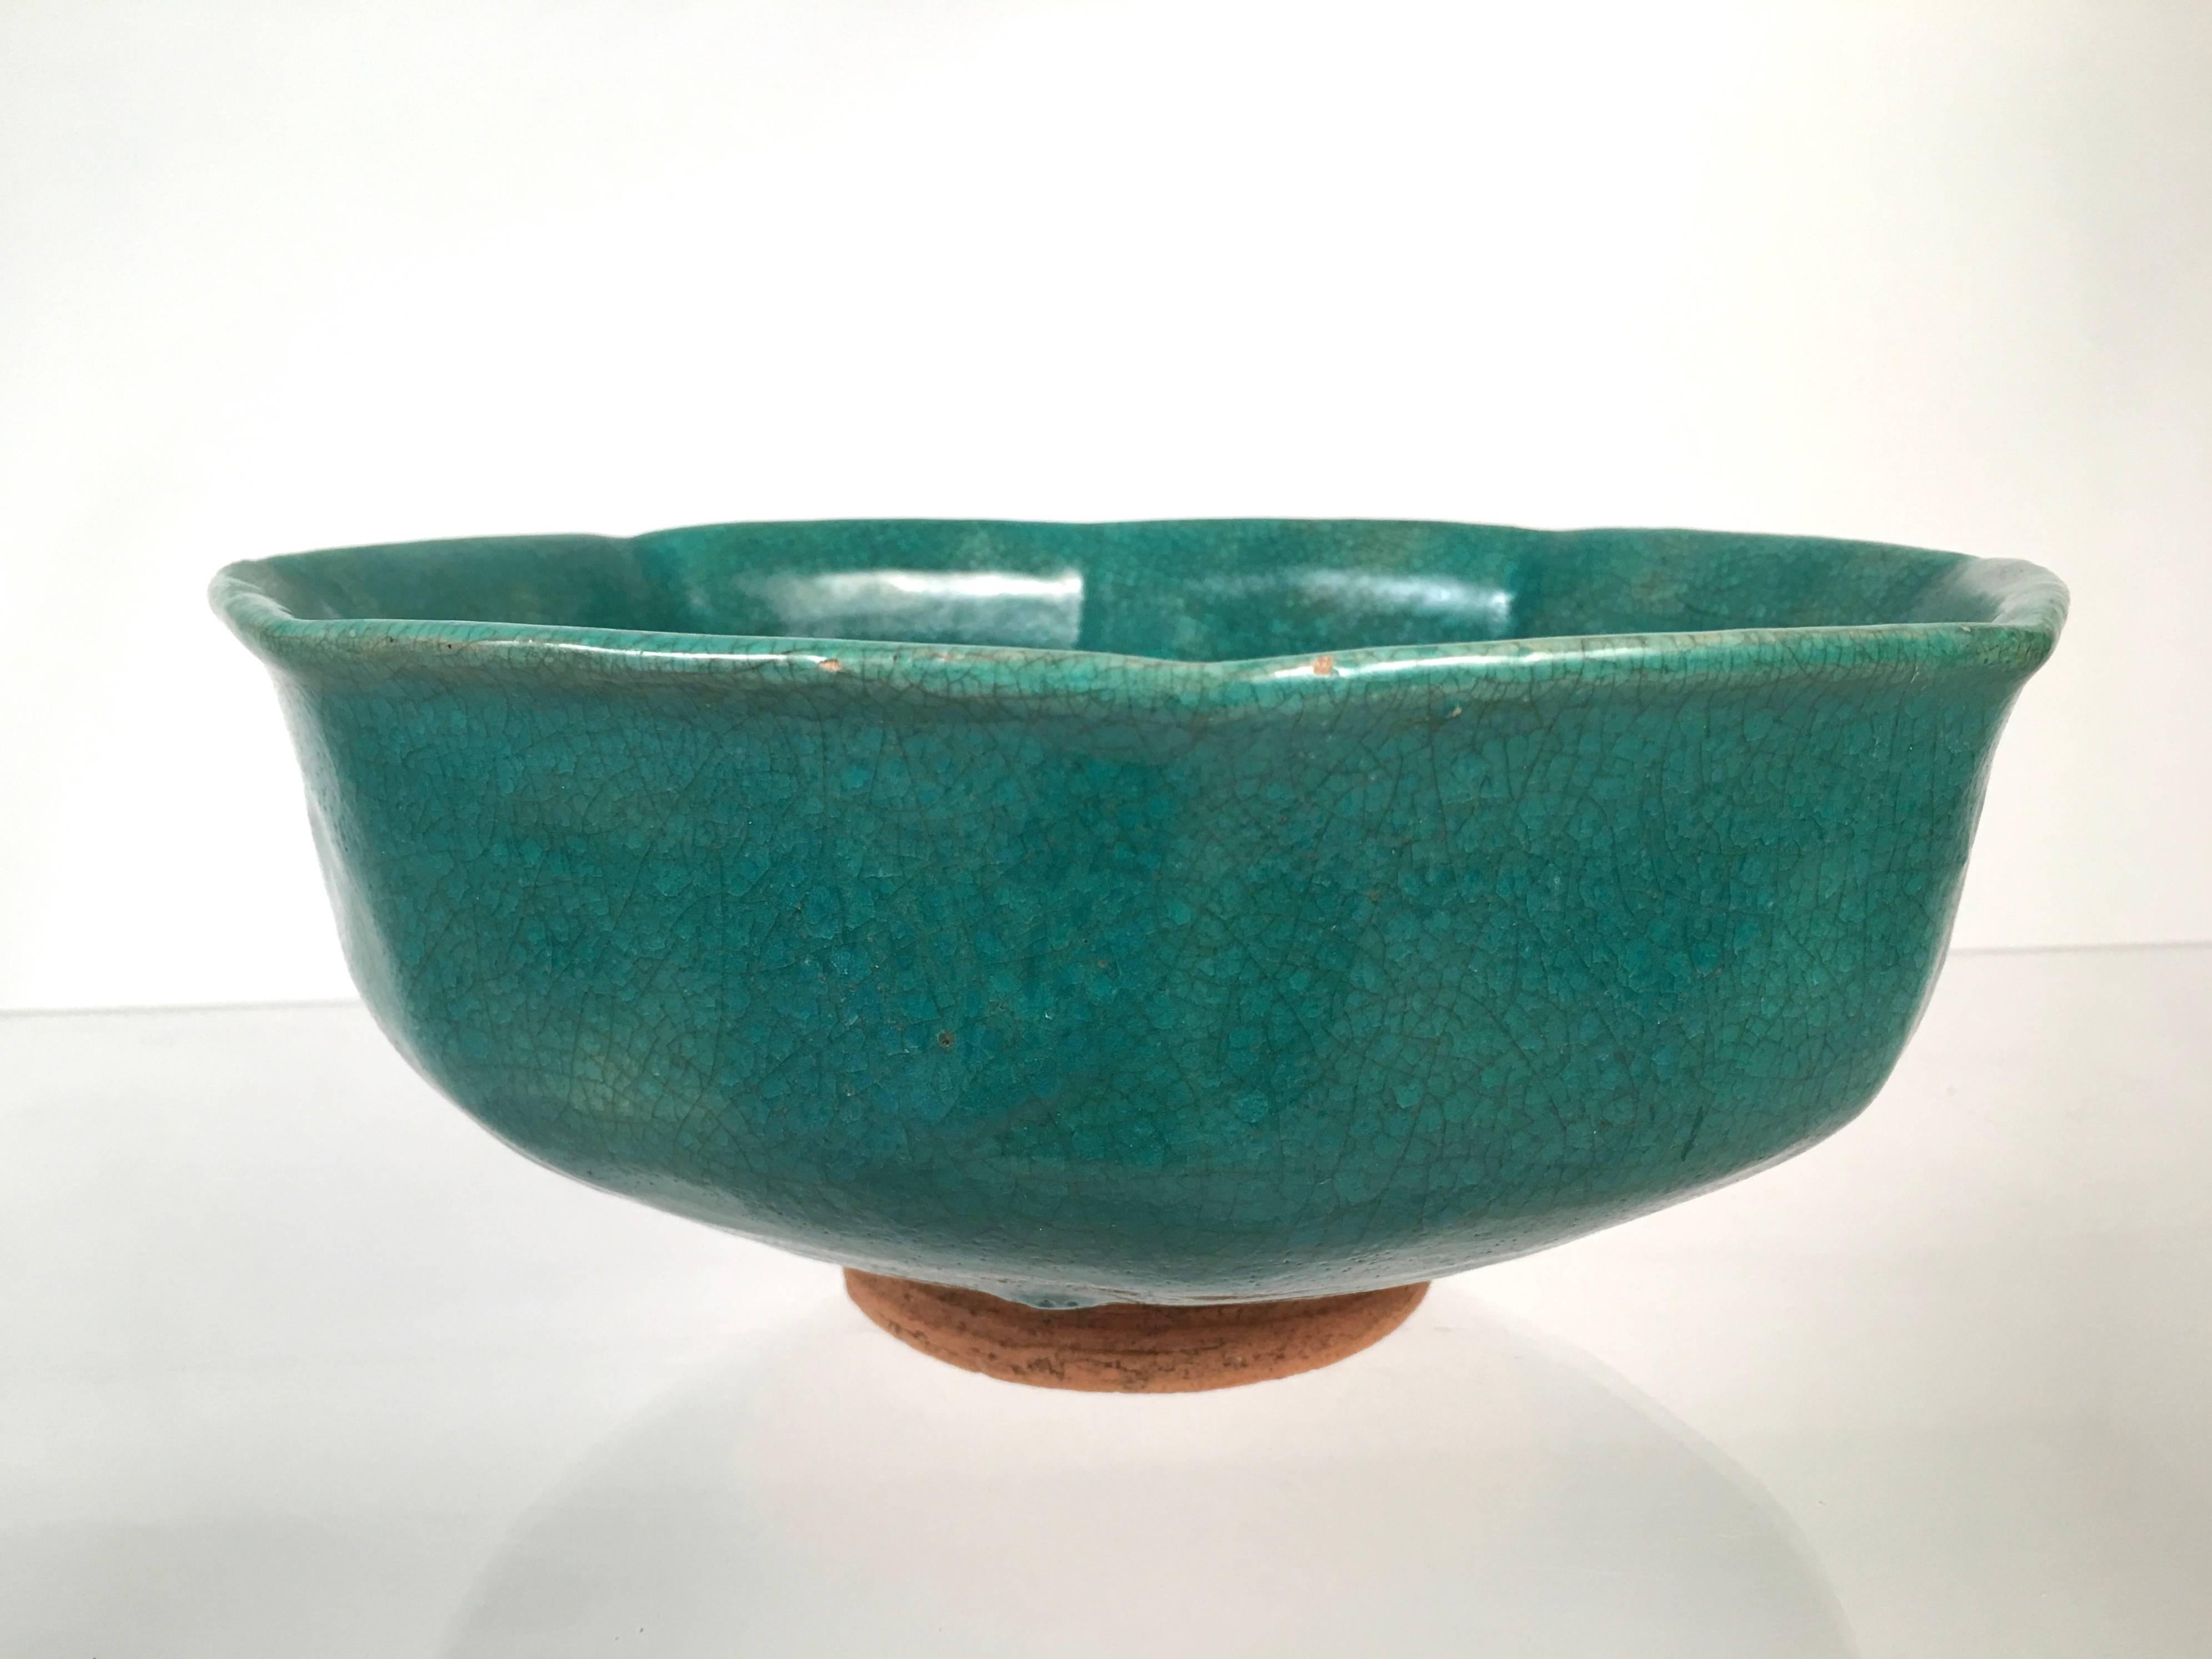 A turquoise glazed art pottery bowl by Leon Volkmar for Durant Kilns, of circular form, with an octagonal rim which tapers down to a circular unglazed foot ring, the bottom of which is incised Durant and 1915, the year of manufacture. The turquoise